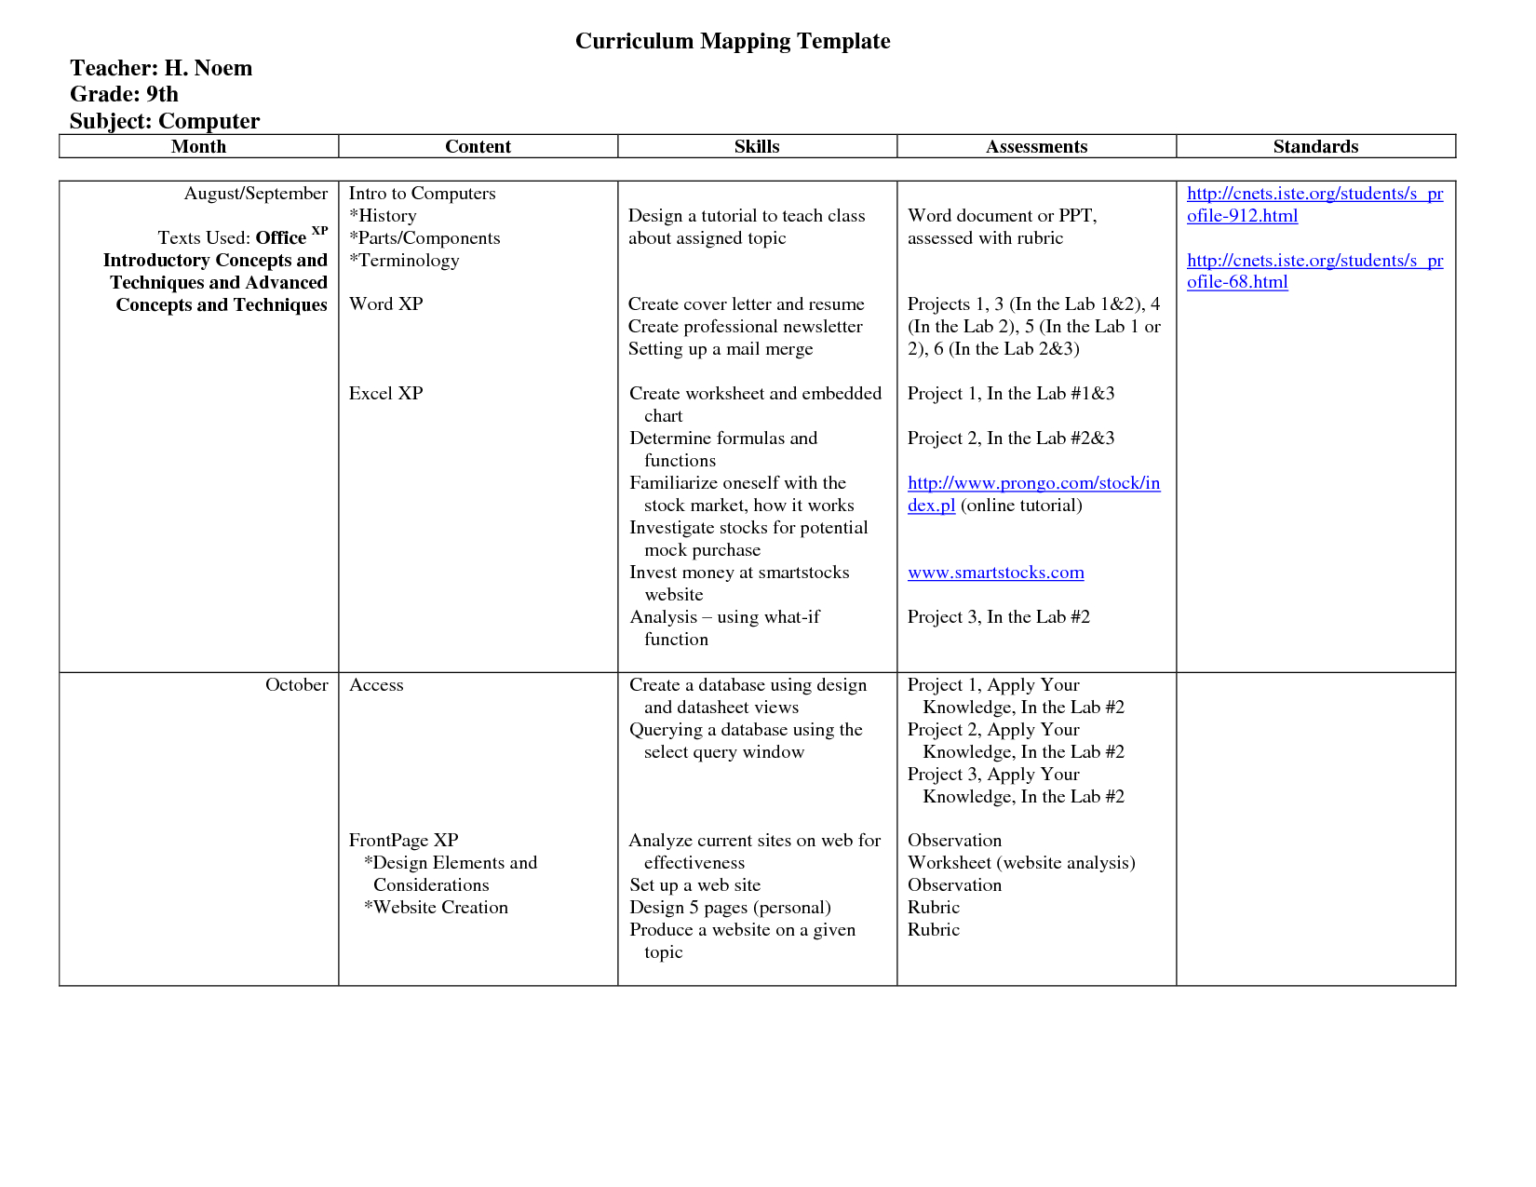 25 Images Of Curriculum Mapping Template For Training pertaining to